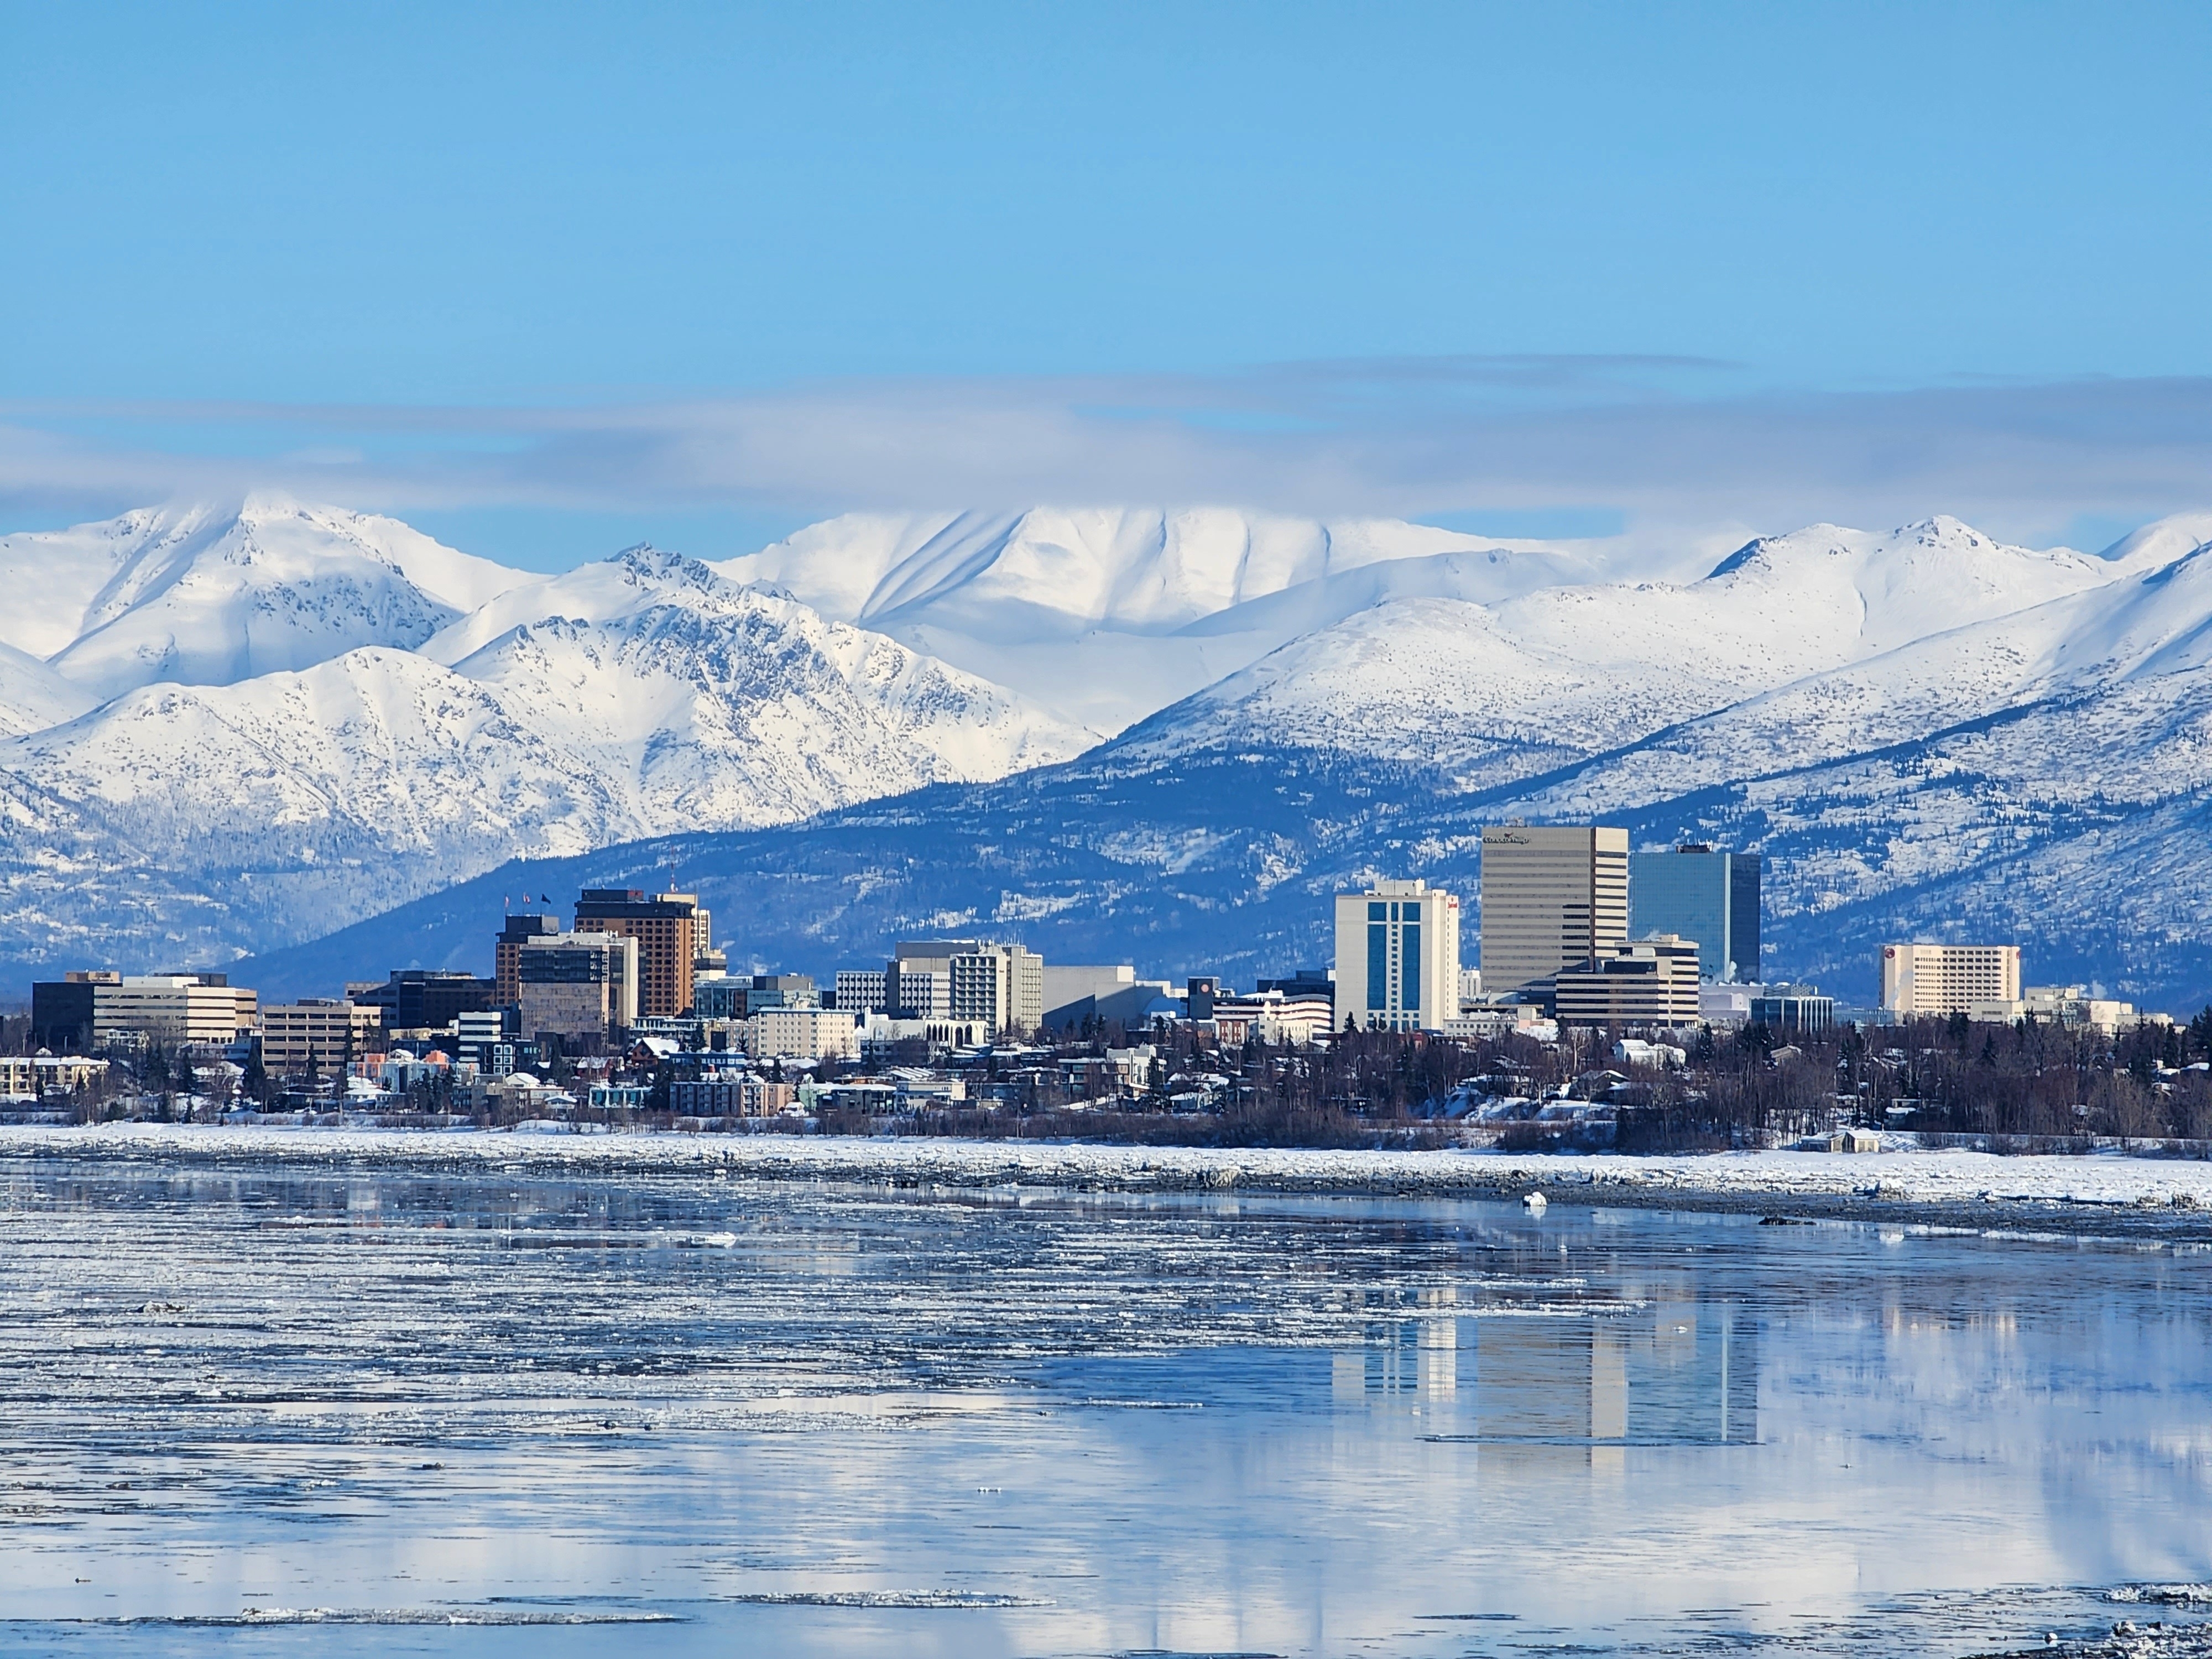 The snowy city of Anchorage, Alaska | Source: Shutterstock